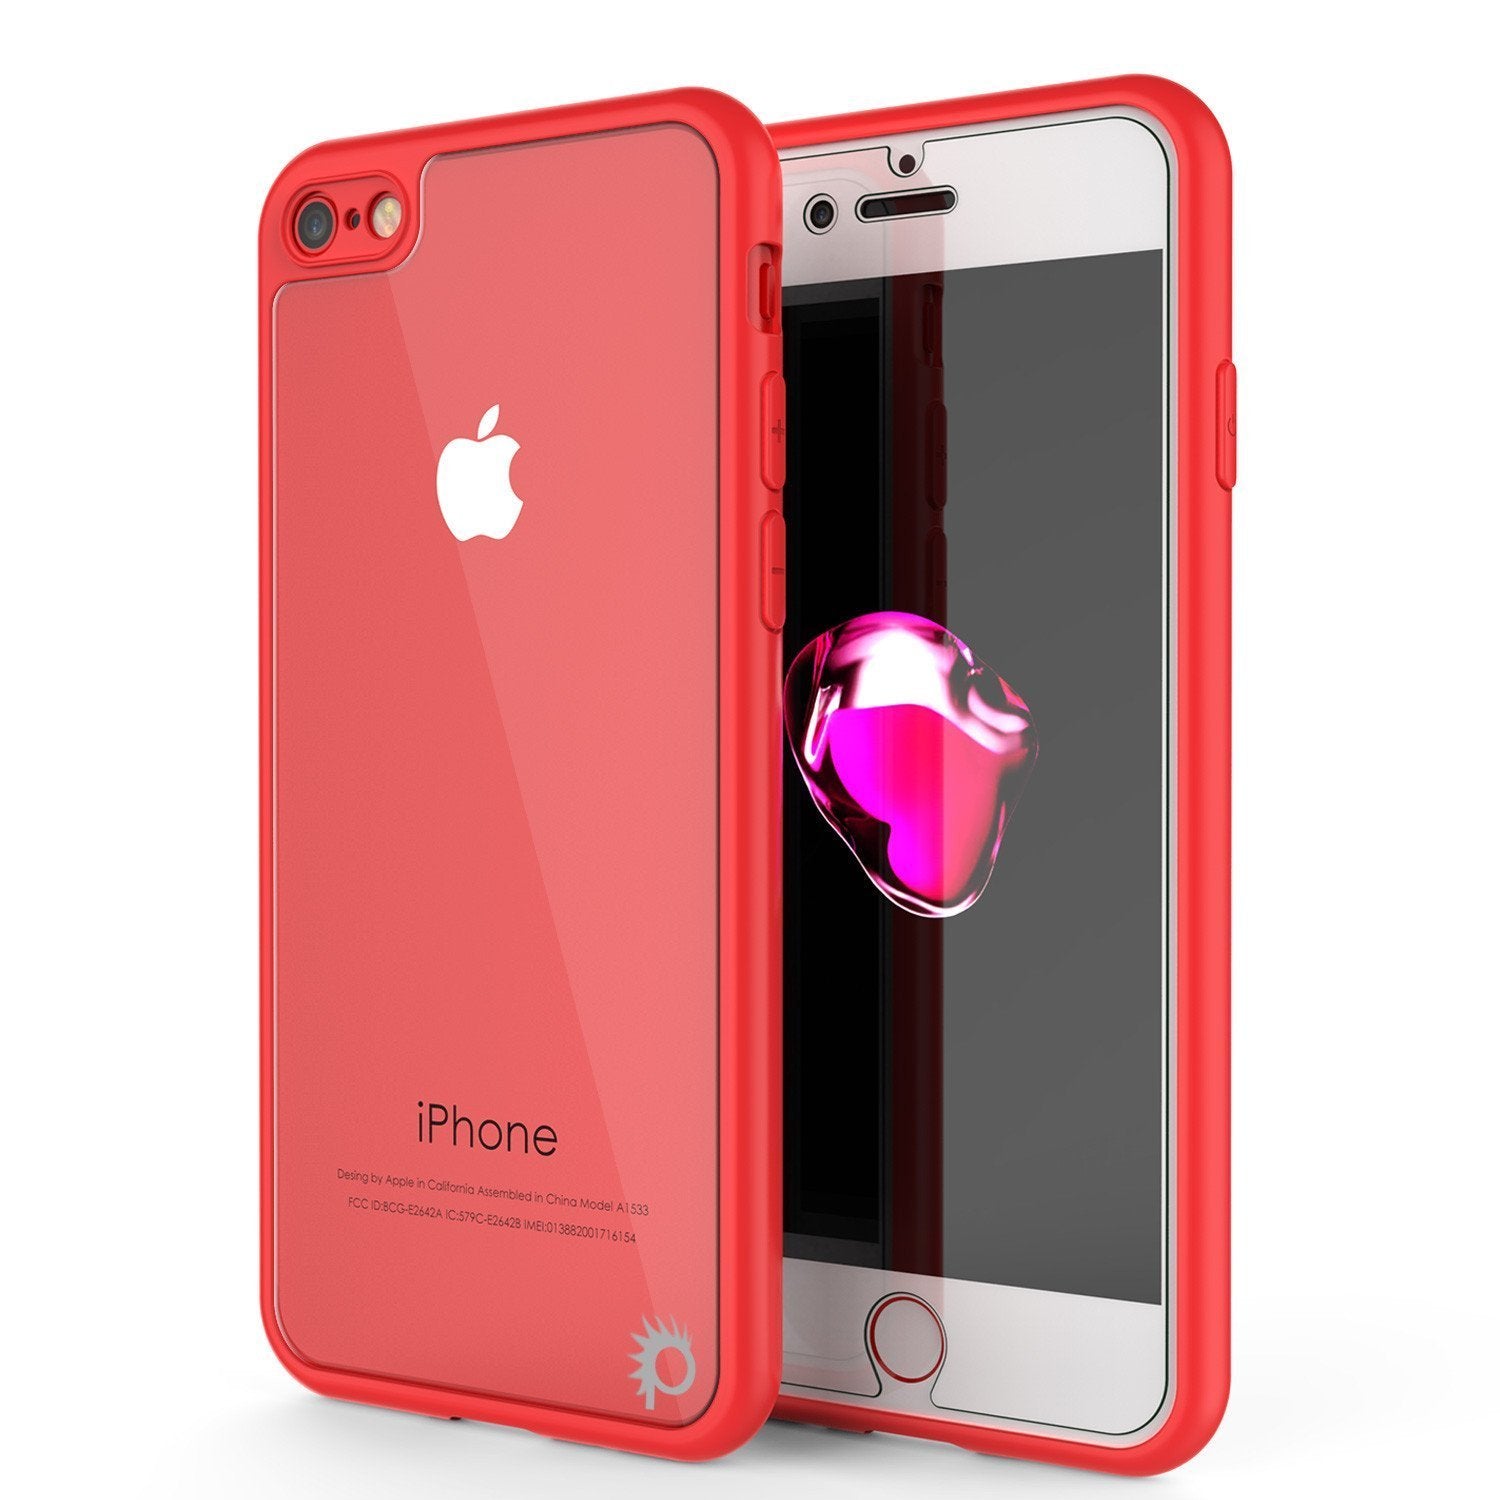 iPhone SE (4.7) Case [MASK Series] [RED] Full Body Hybrid Dual Layer –  punkcase